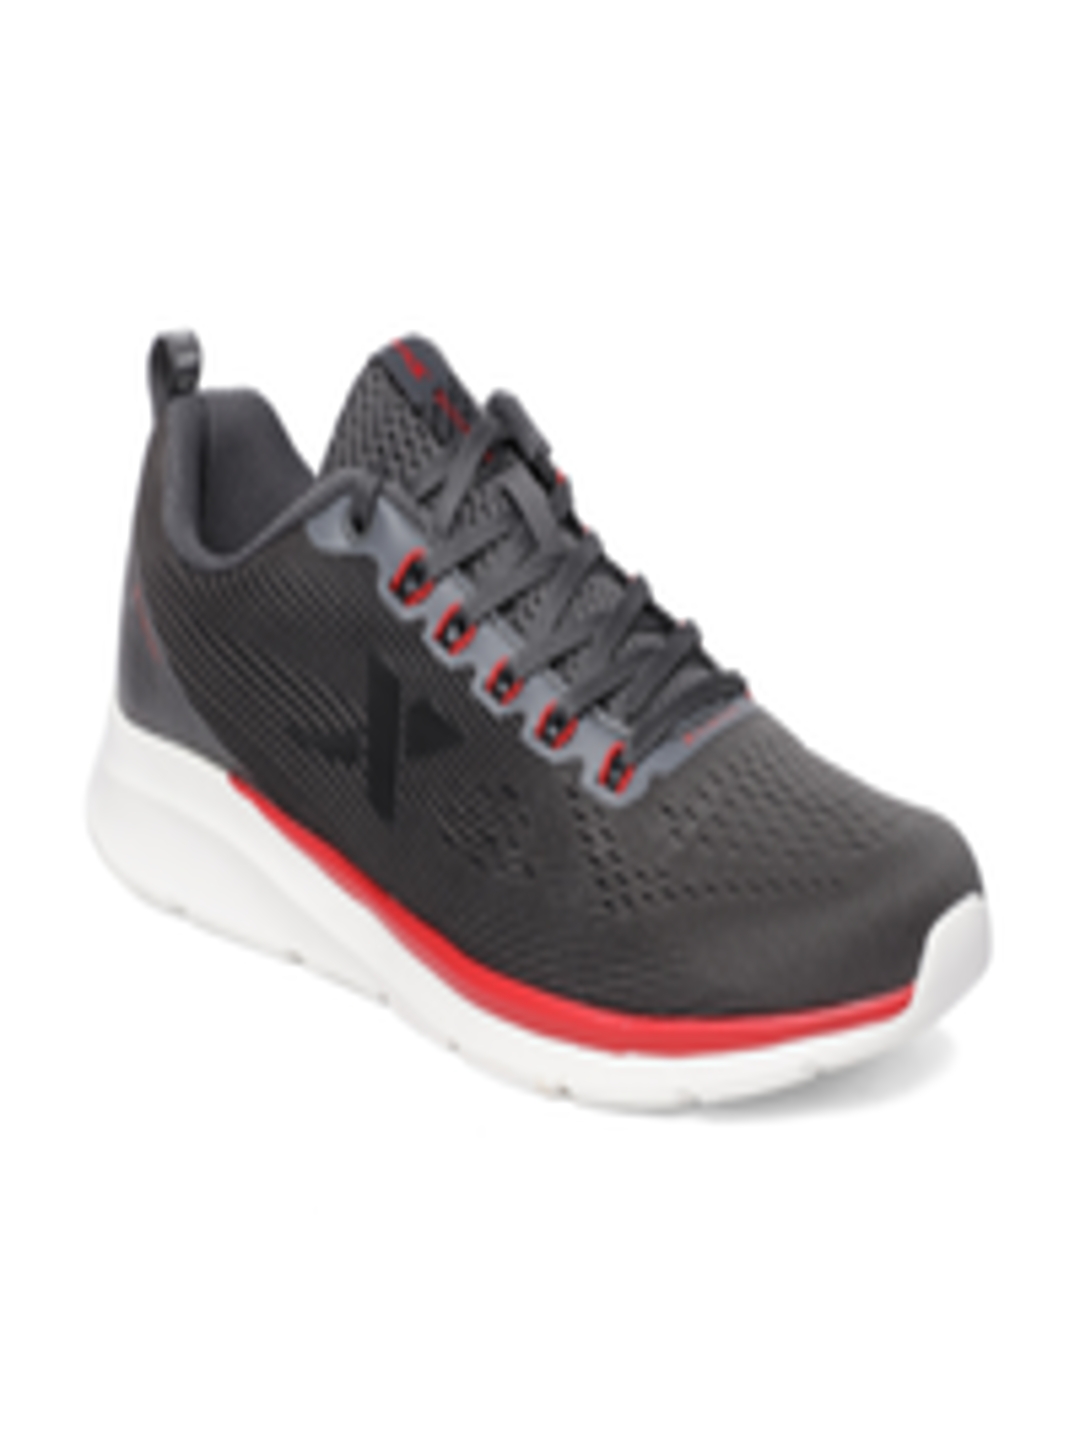 Buy Xtep Men Grey Running Shoes - Sports Shoes for Men 9586697 | Myntra